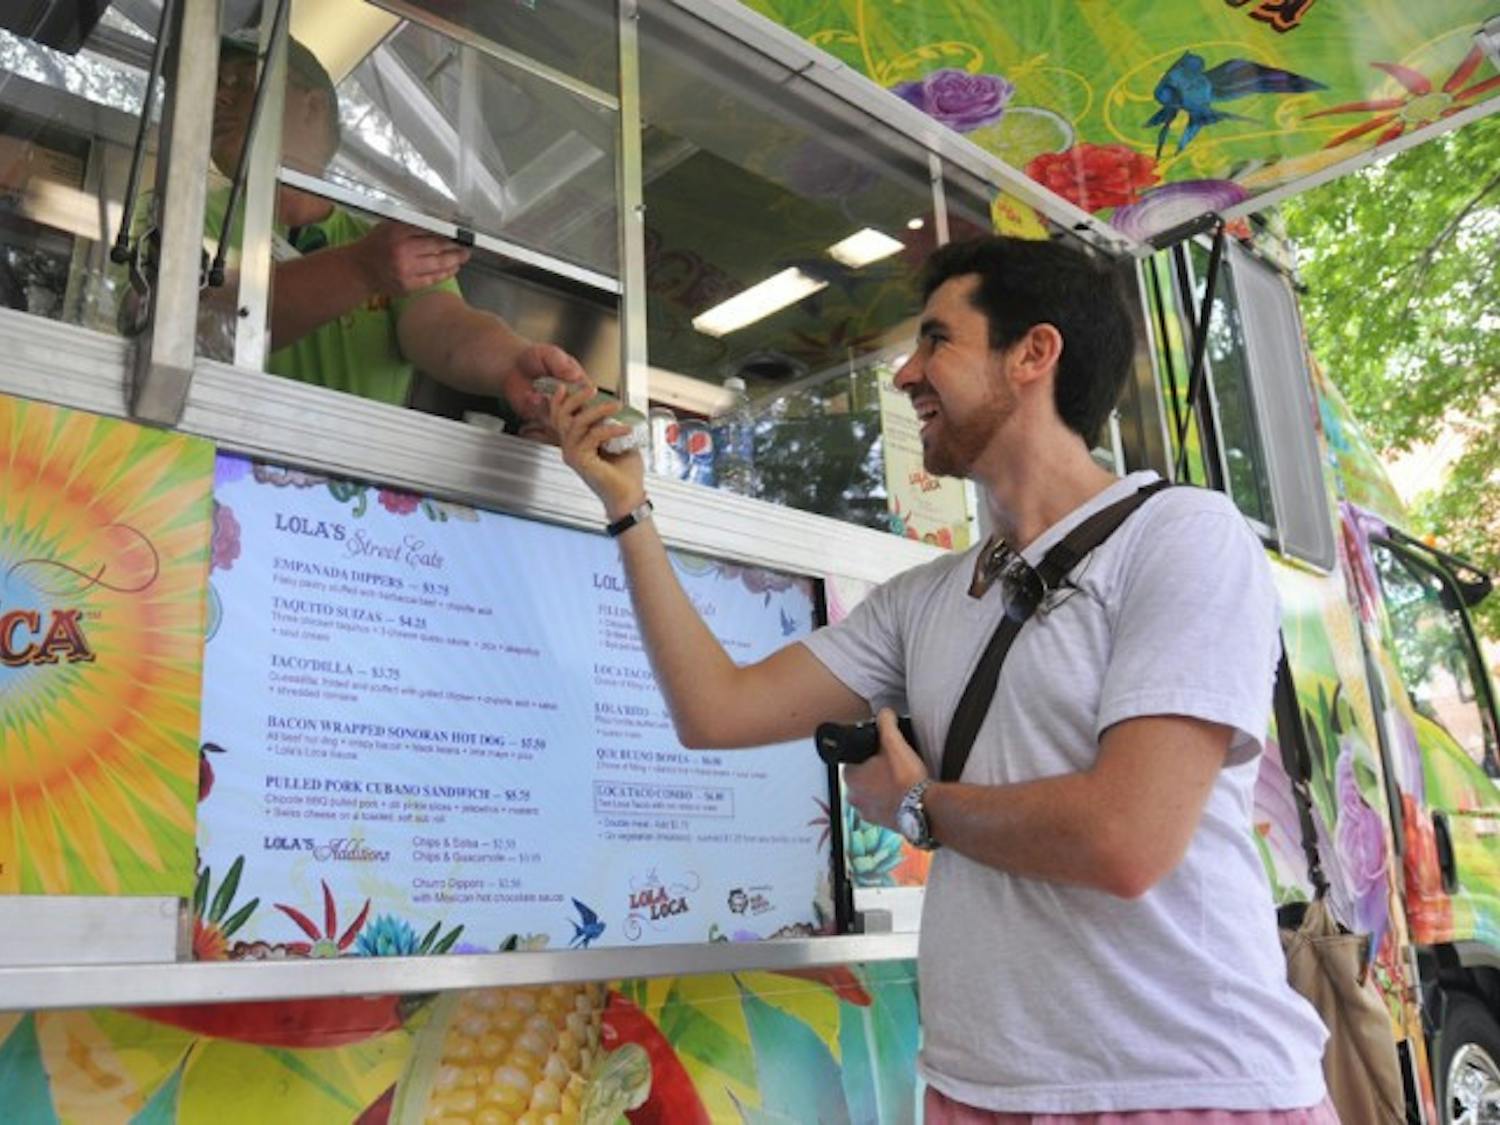 Stefan Wolff, a 20-year-old economics junior, grabs a pulled pork cubano candwich for lunch at the La Lola Loca food truck near the Plaza of the Americas on Tuesday.